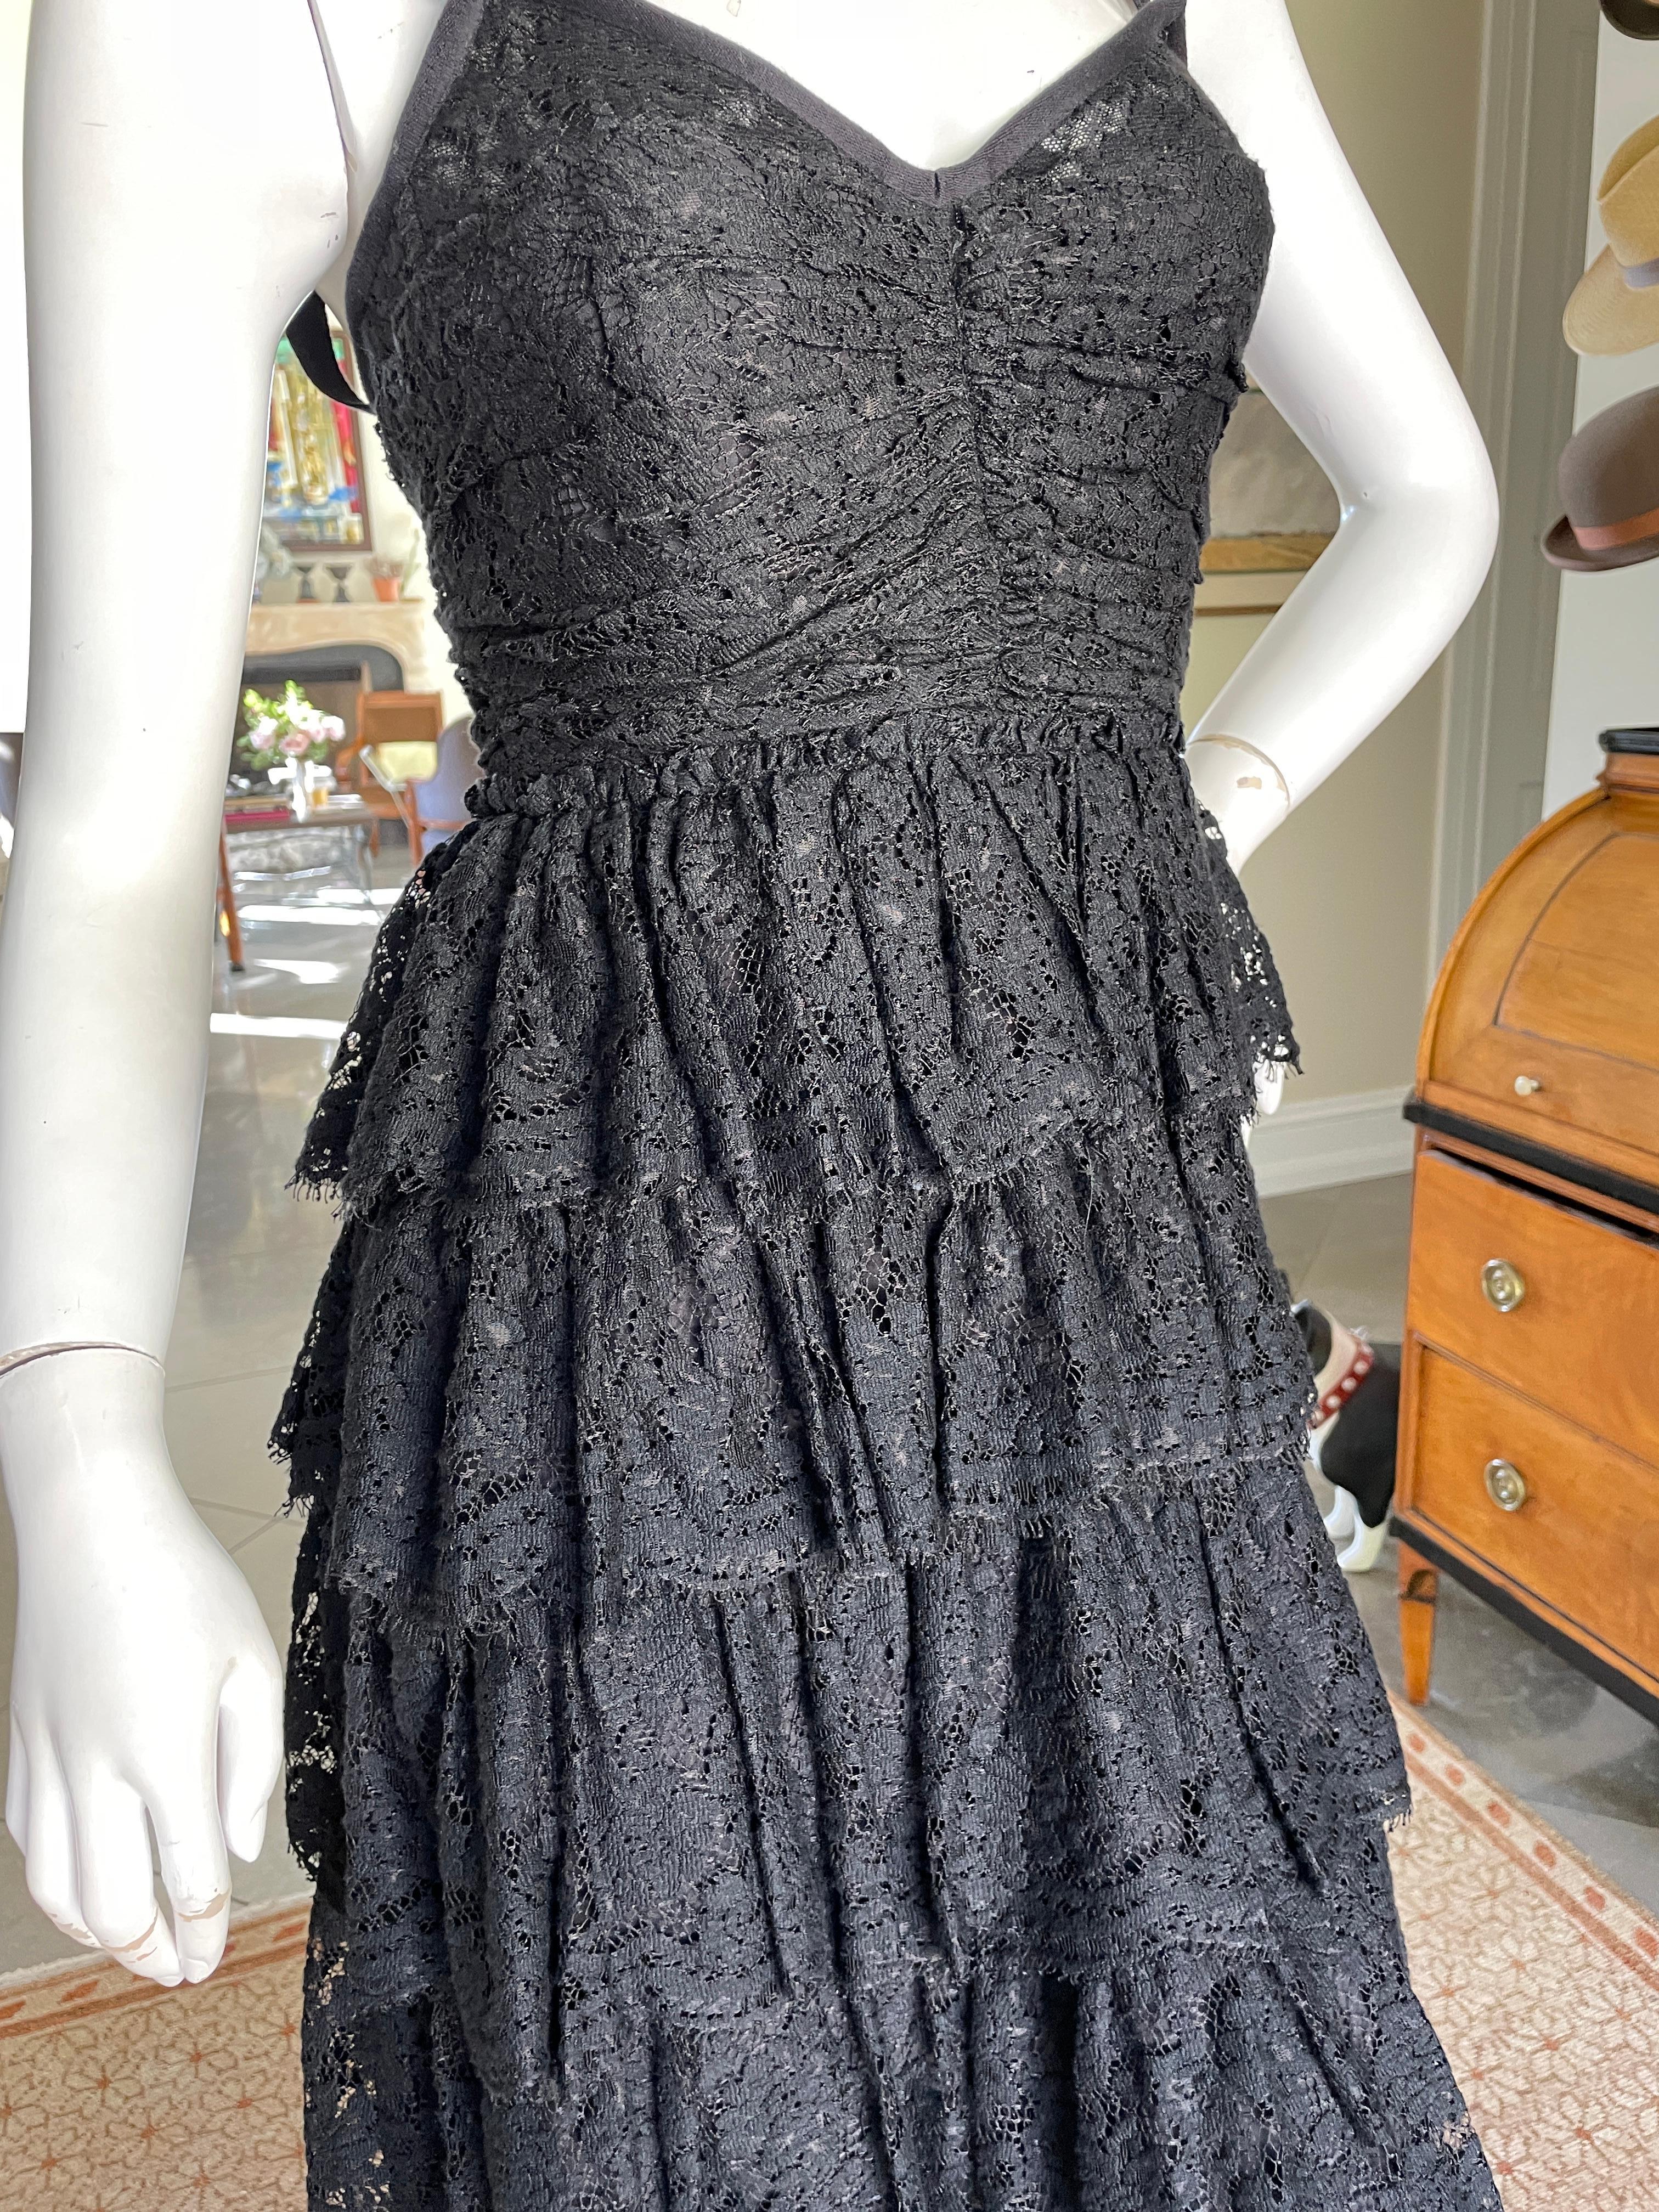 D&G by Dolce & Gabbana Vintage Black Lace Tiered Cocktail Dress    For Sale 2